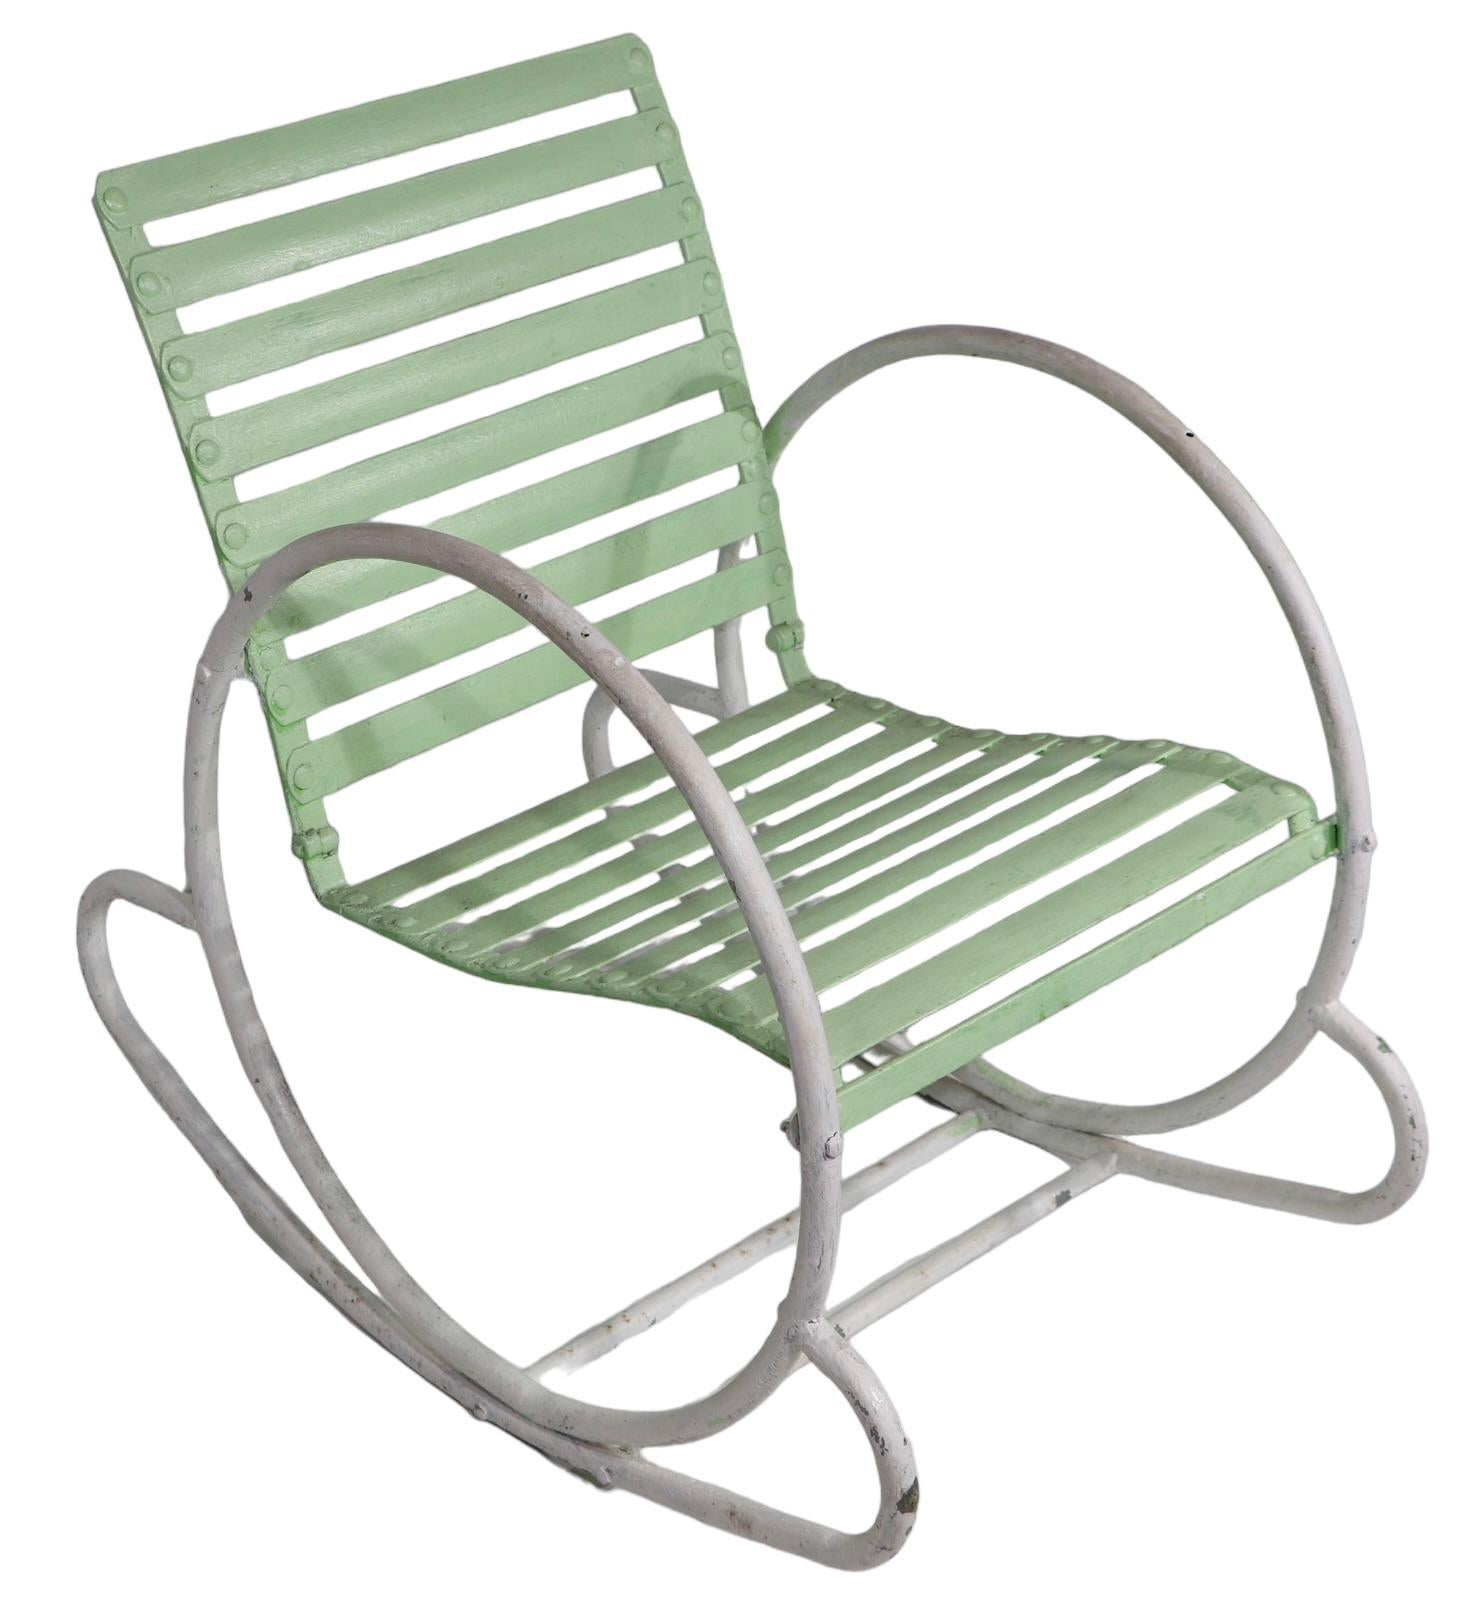 Art Deco Iron and Steel Garden Patio Poolside  Hoop Frame Rocking Chair c 1930's For Sale 7